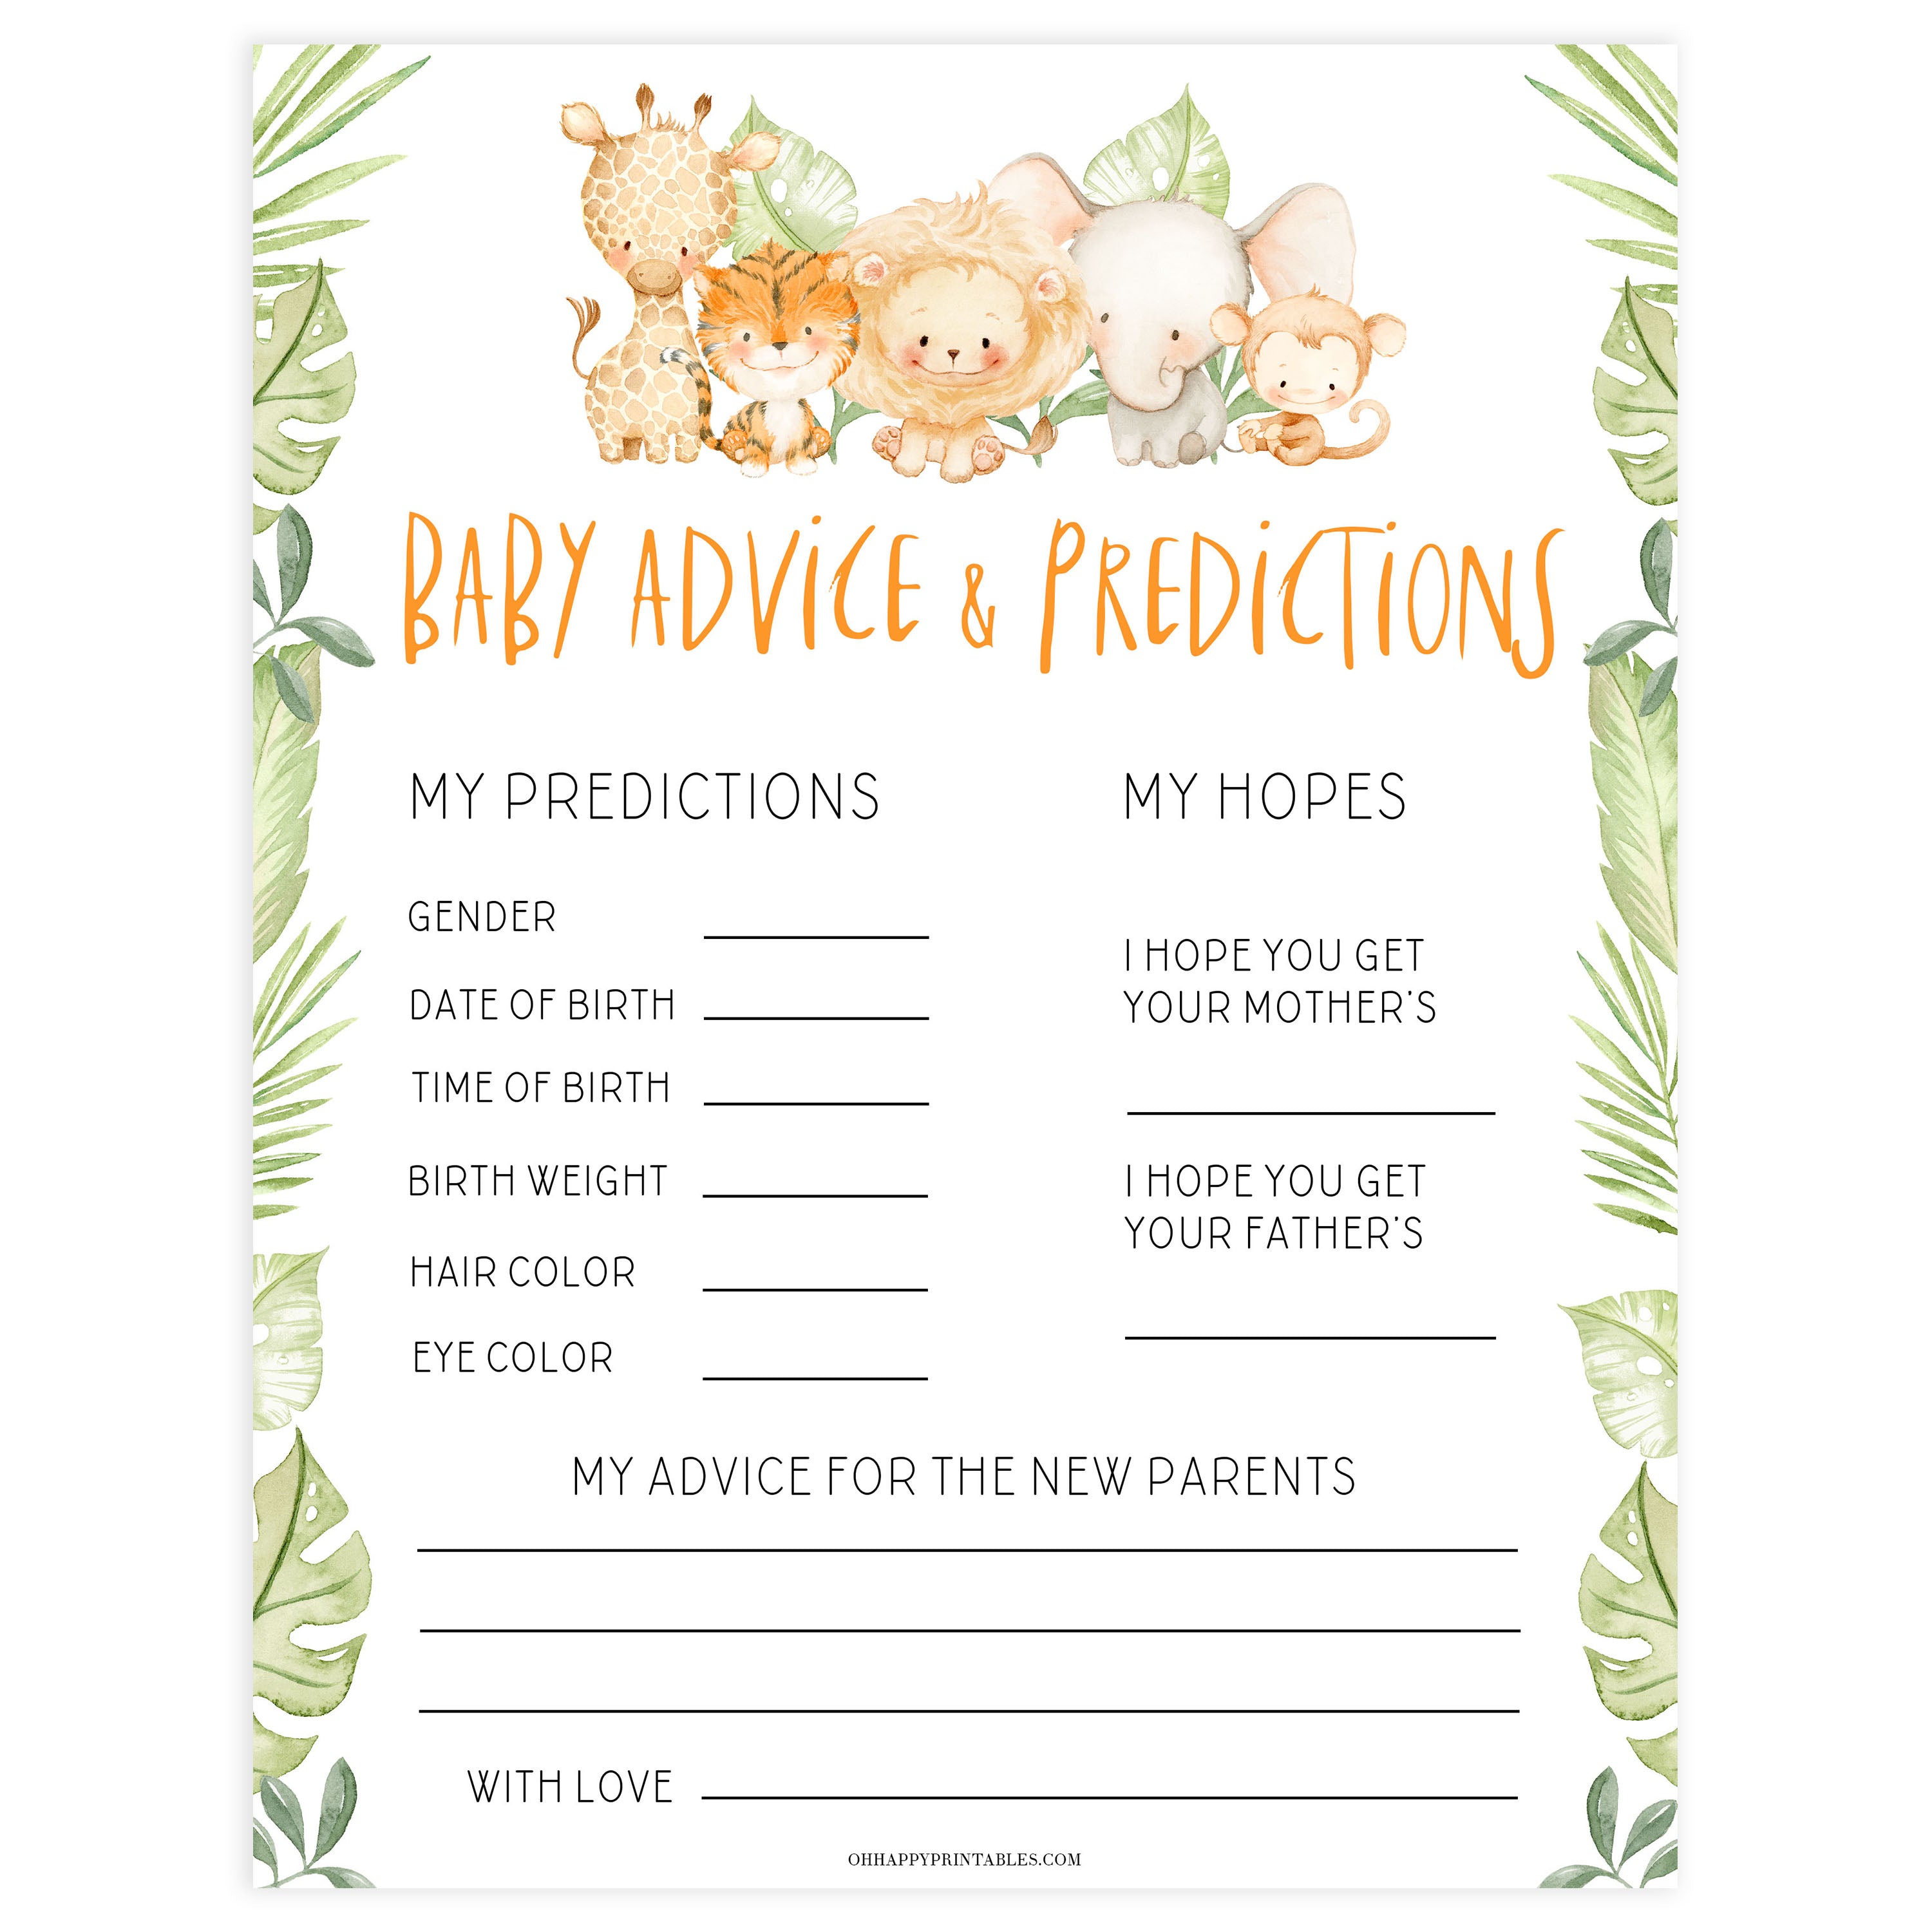 baby advice and predictions game, Printable baby shower games, safari animals baby games, baby shower games, fun baby shower ideas, top baby shower ideas, safari animals baby shower, baby shower games, fun baby shower ideas